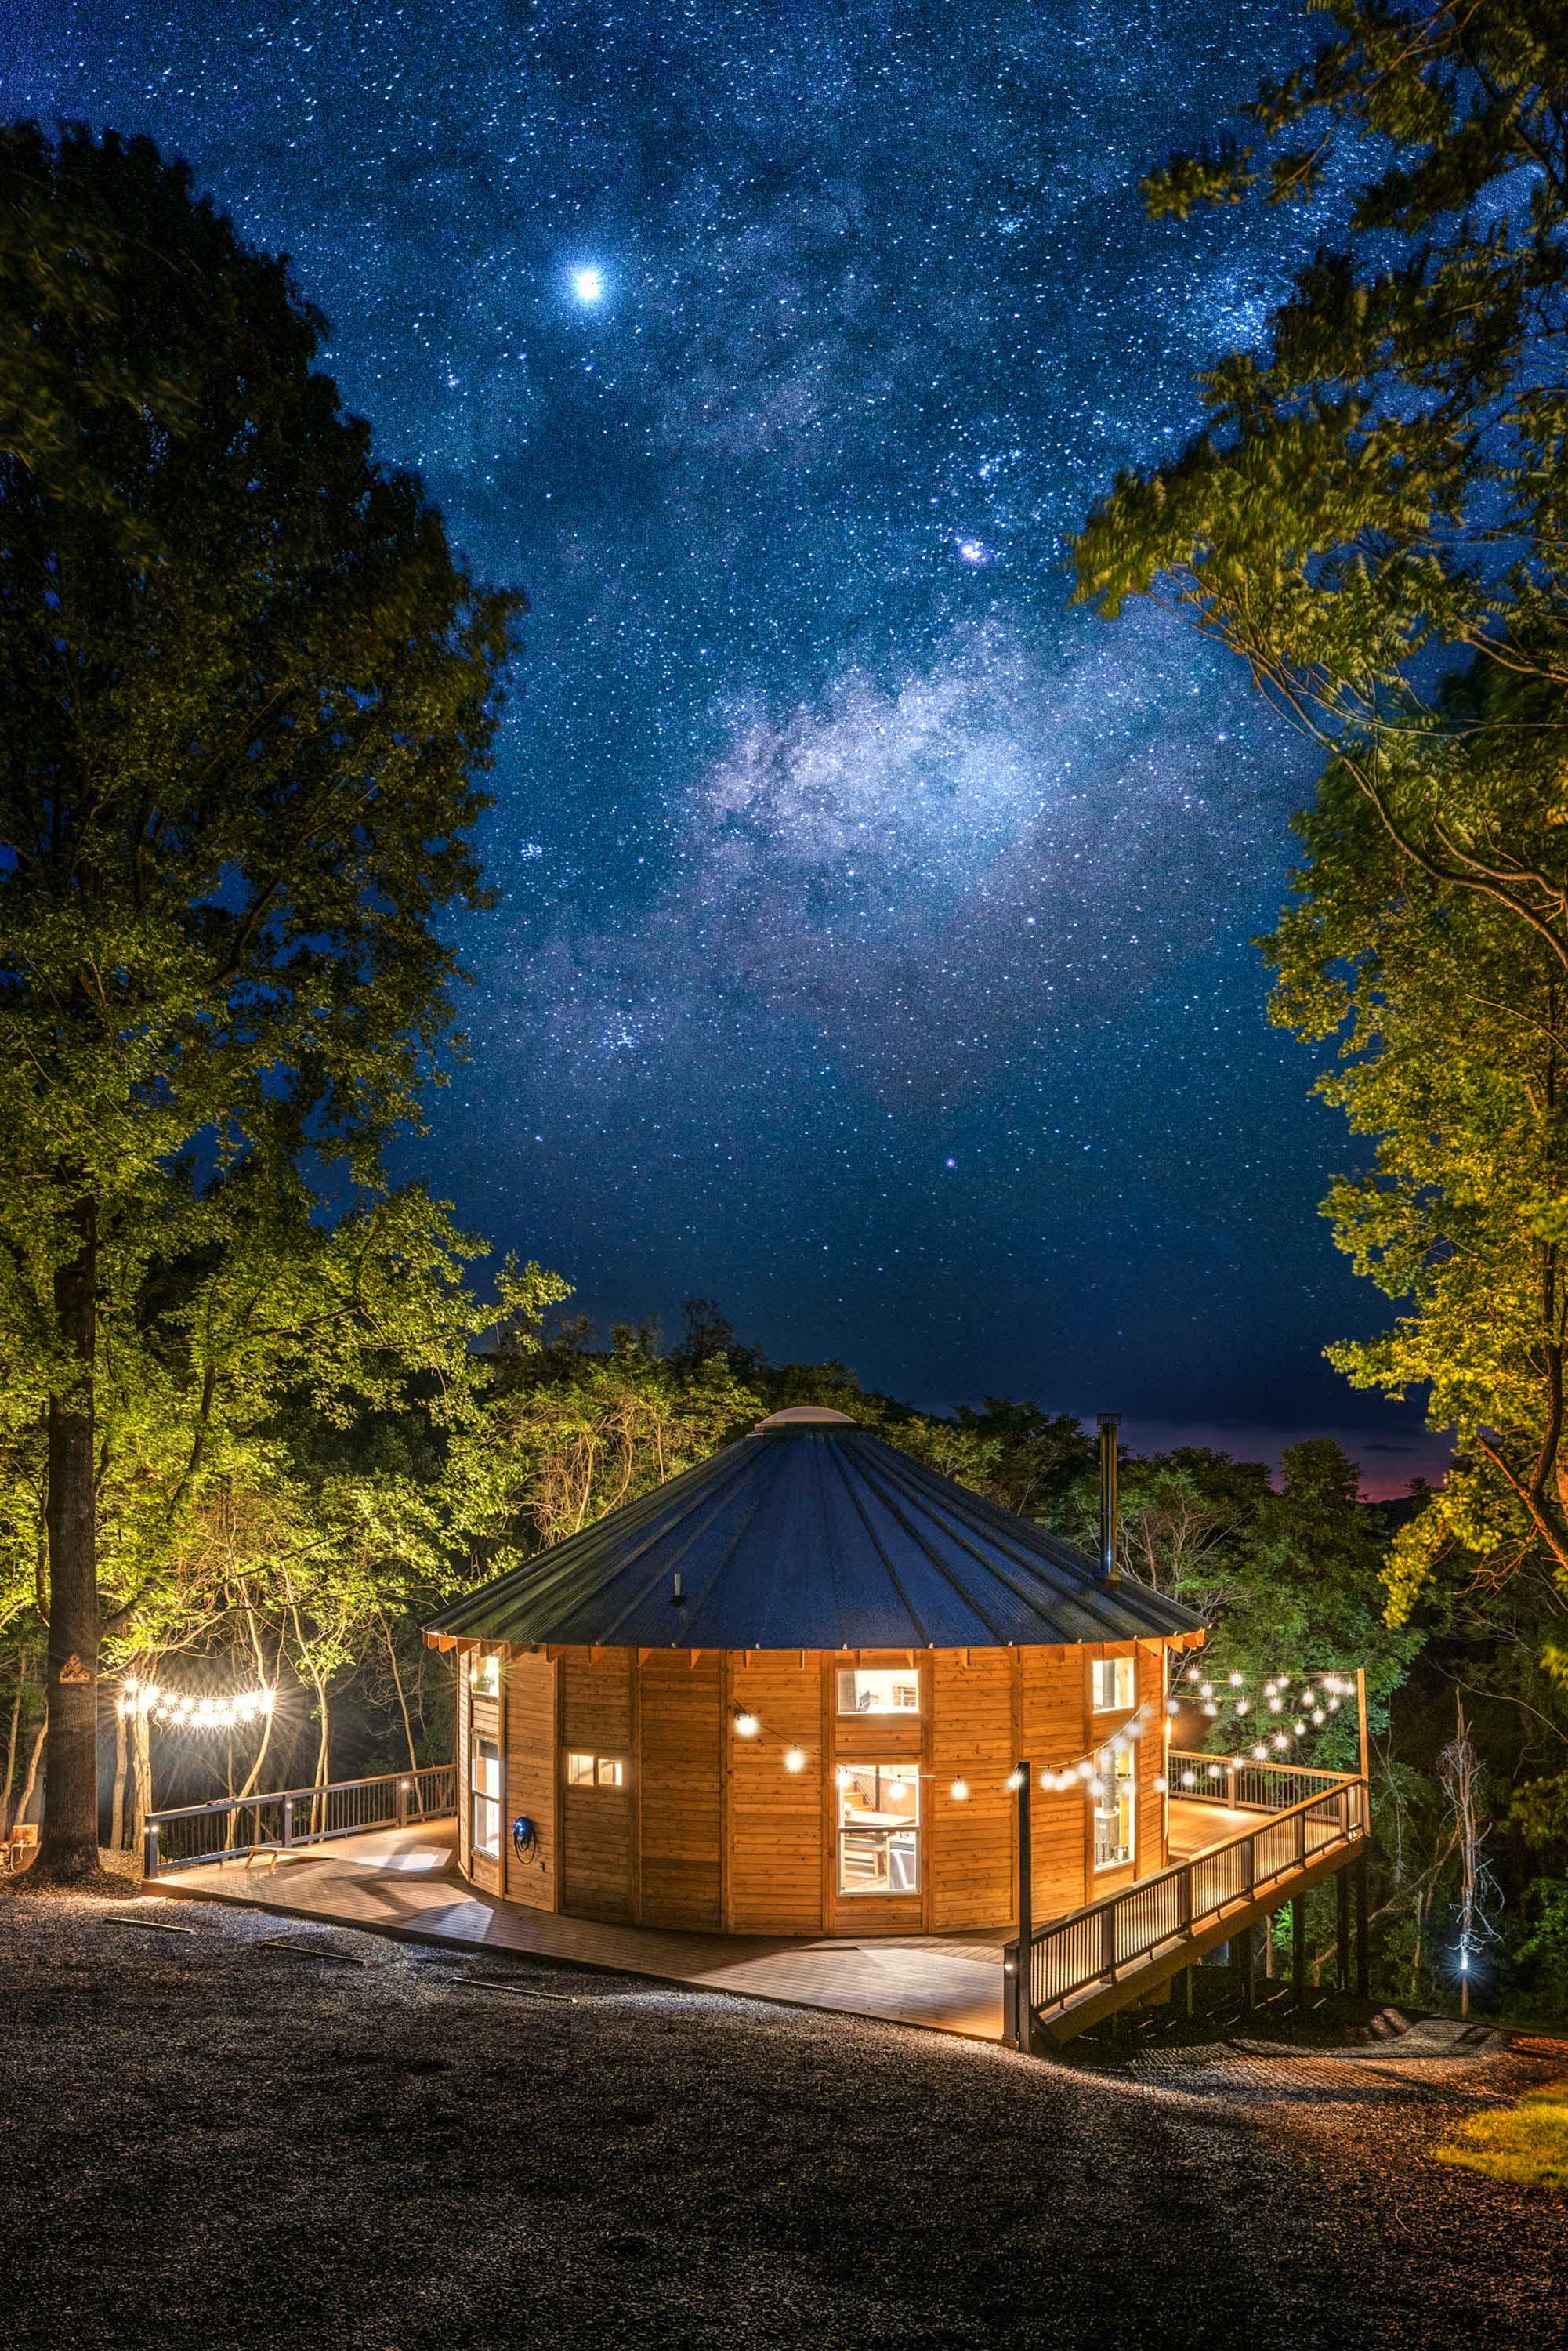 <span  class="uc_style_uc_tiles_grid_image_elementor_uc_items_attribute_title" style="color:#ffffff;">Stargazing at the Shenadoah Yurt</span>